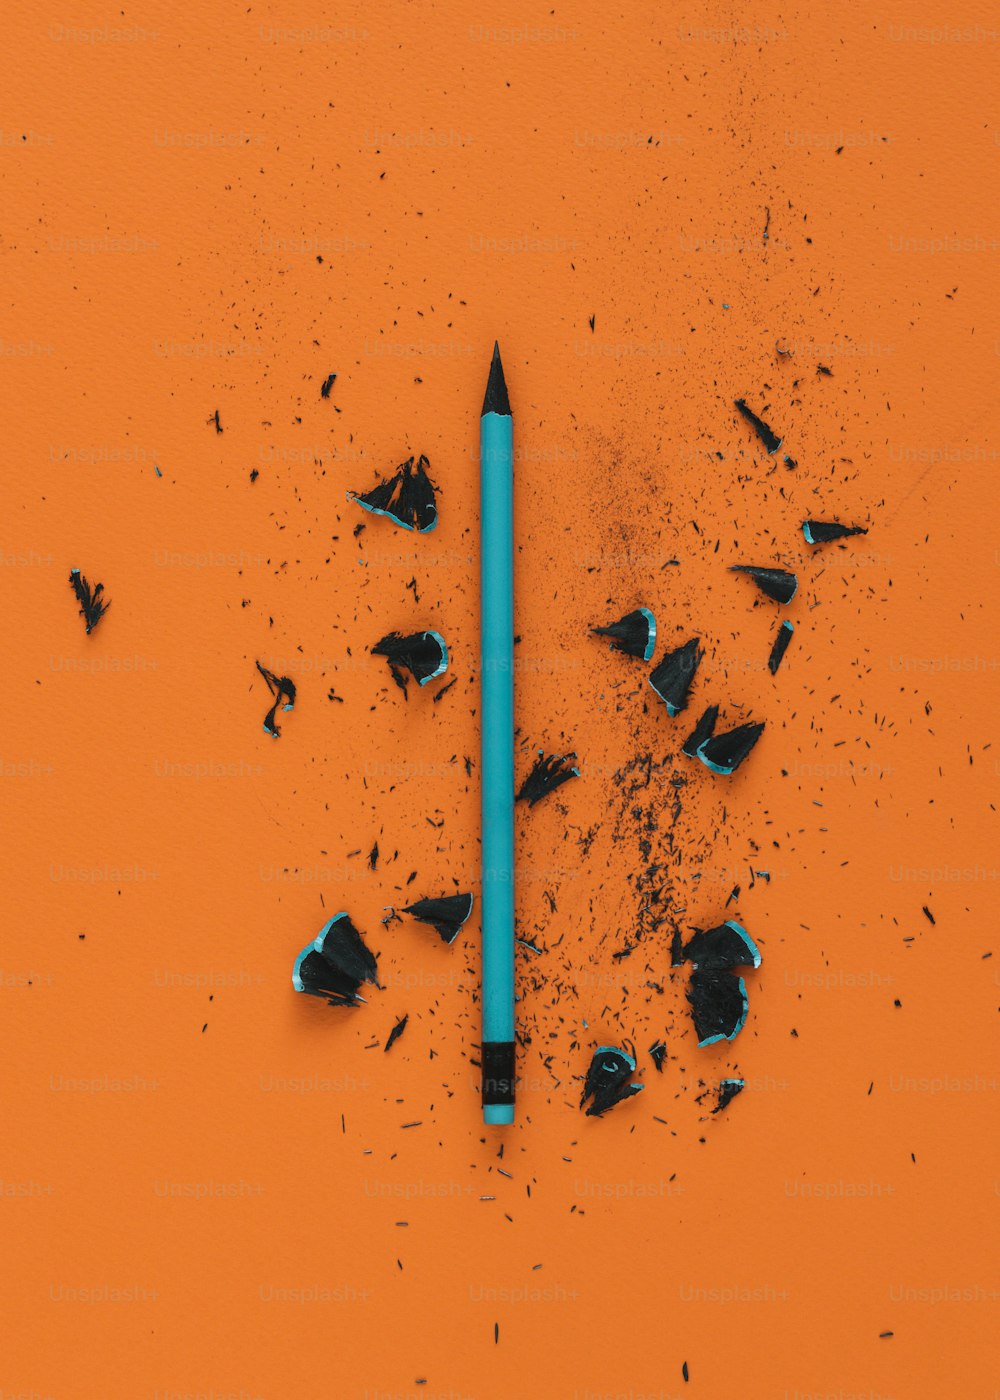 a blue pencil laying on top of a pile of debris